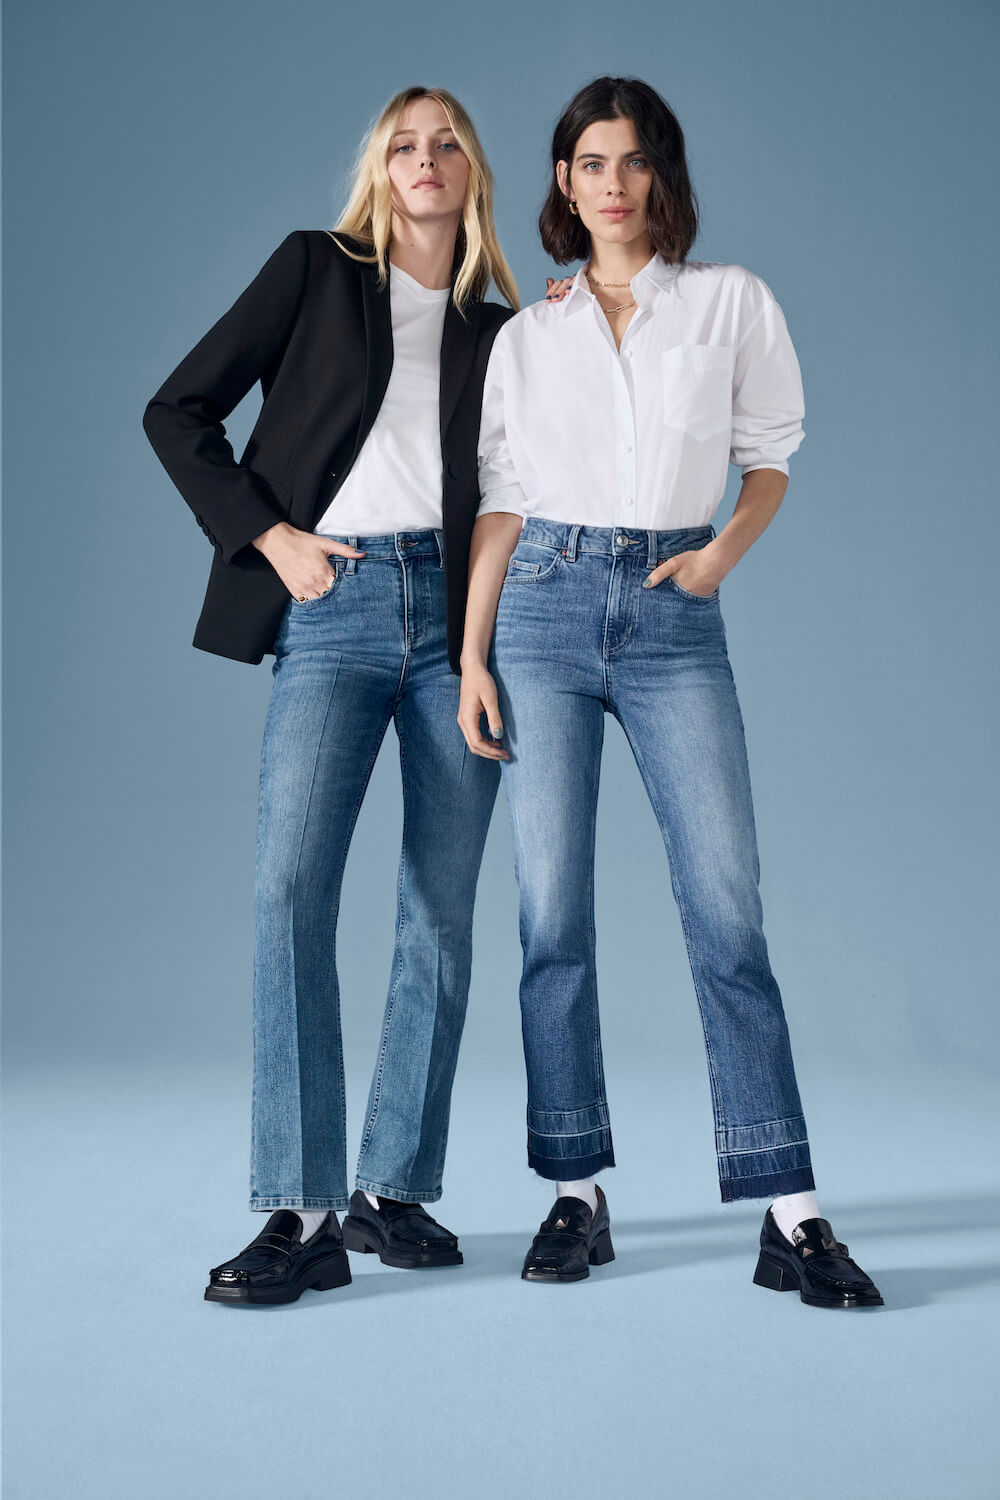 m&s jeans